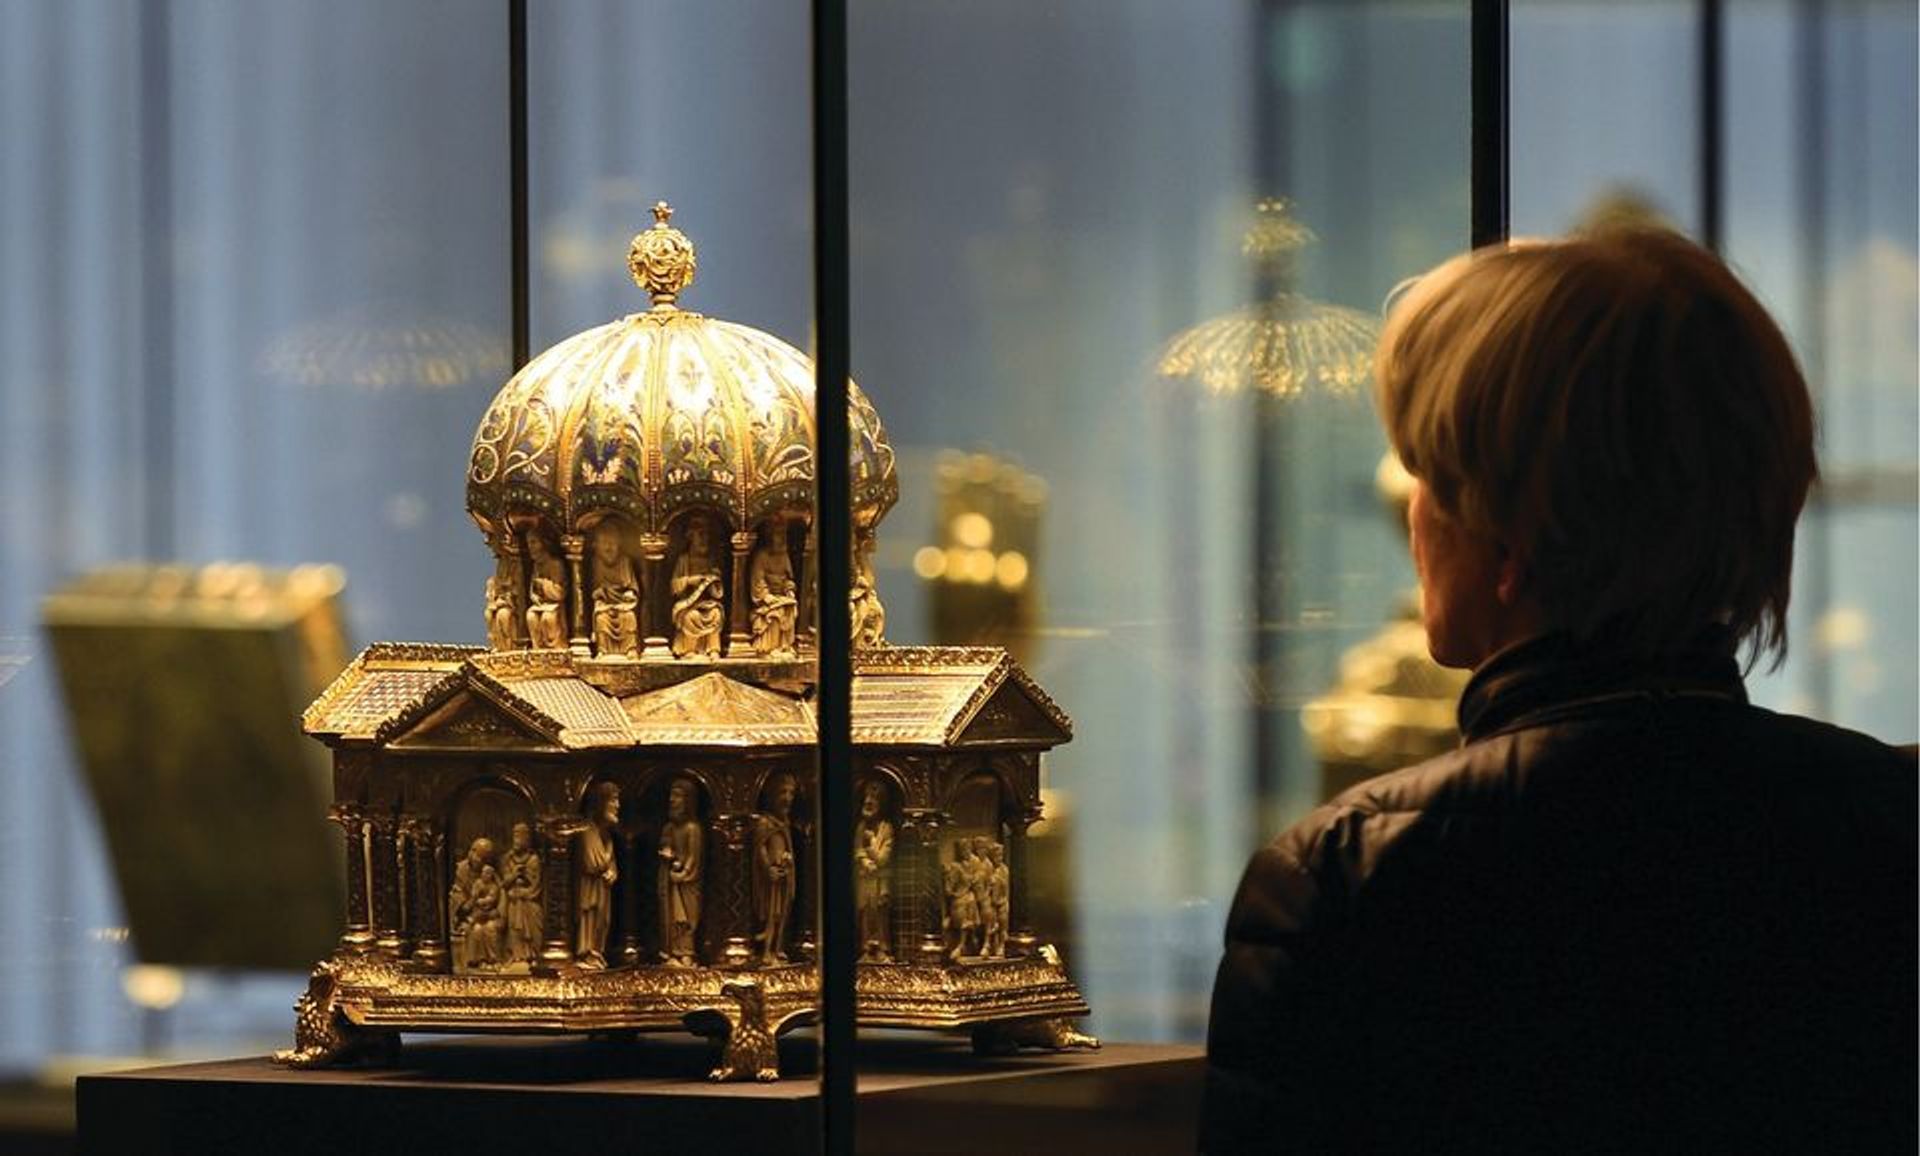 This cupola reliquary is part of the Guelph Treasure, displayed at the Kunstgewerbemuseum (Museum of Applied Arts) in Berlin Photo: AFP Photo/Tobias Schwarz